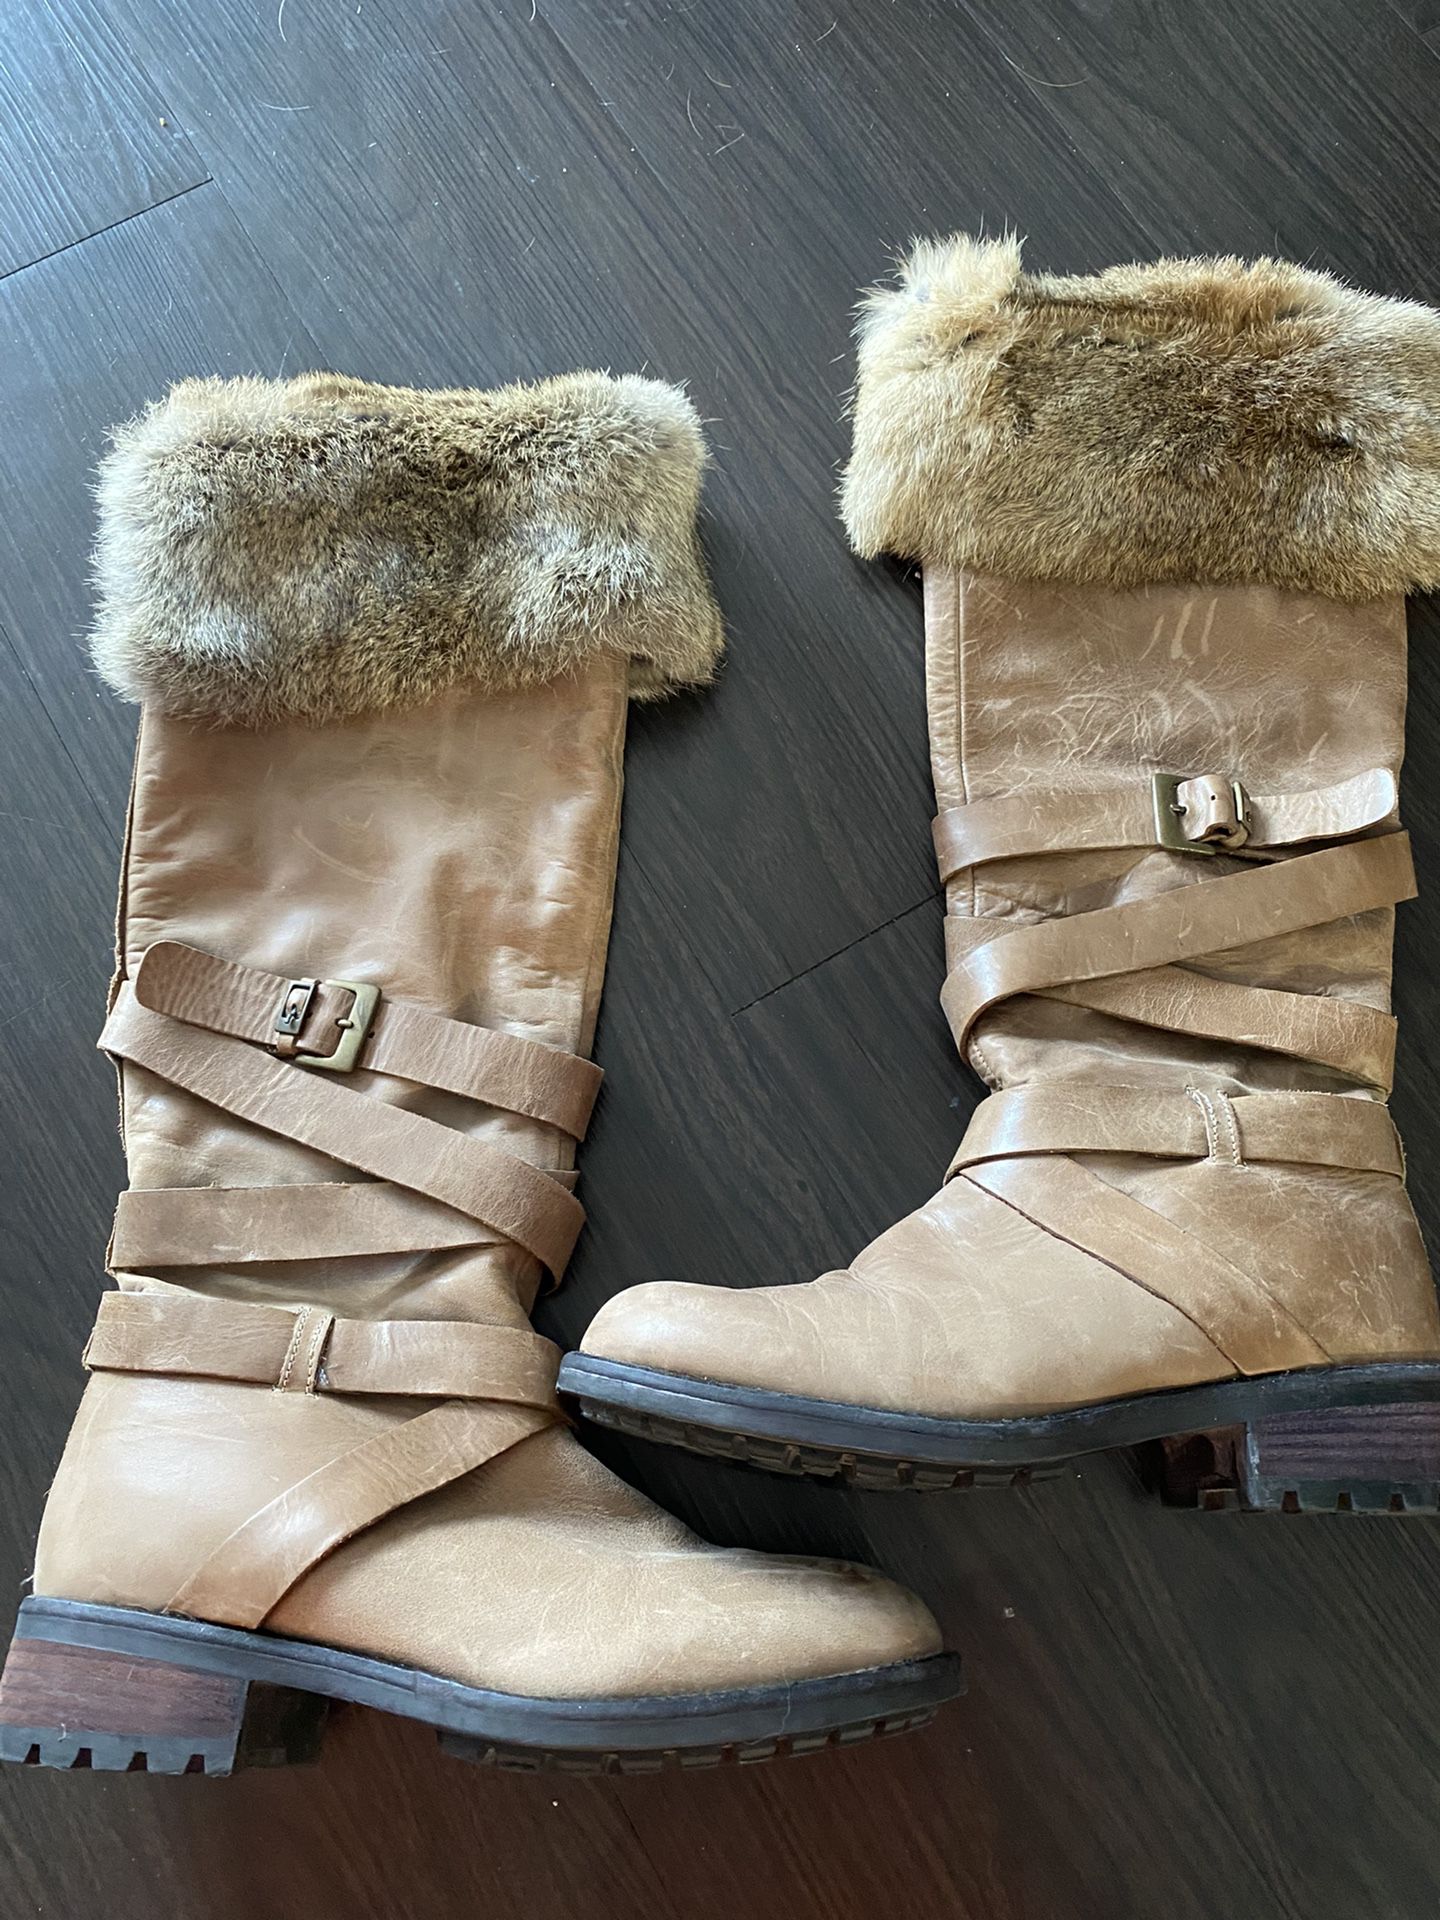 Real Fur Boots From Italy 